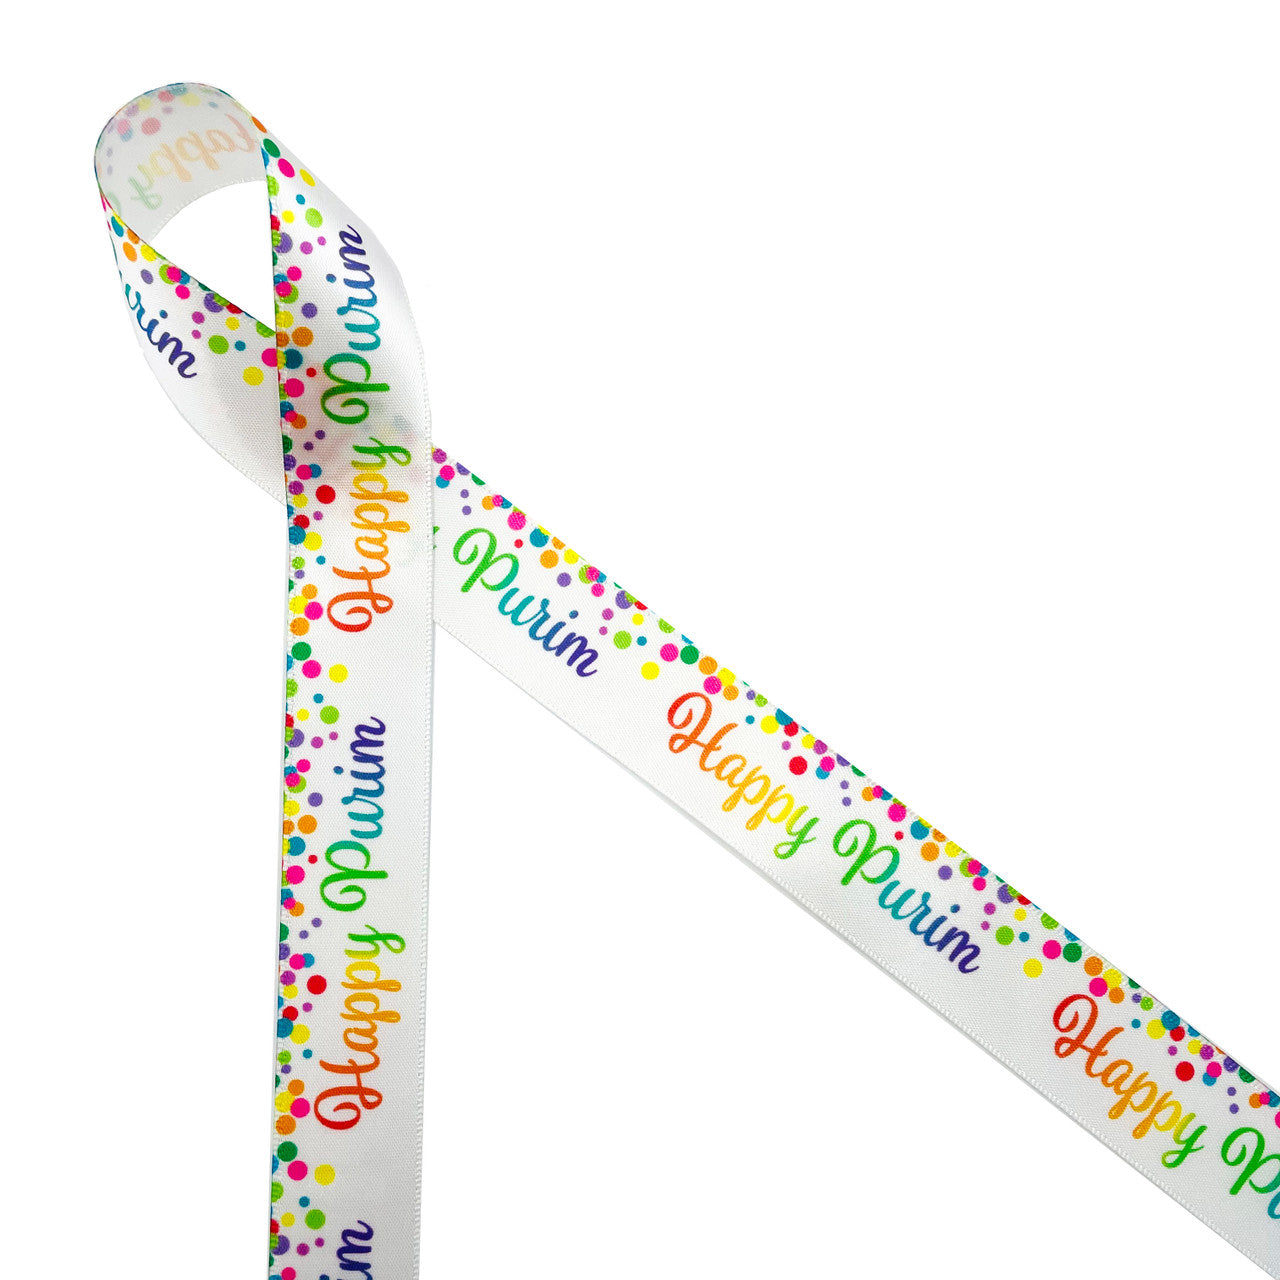 Happy Purim ribbon with confetti dots in primary colors printed on 7/8" white single face satin is ideal for gift wrap, gift baskets, favors, and table decor. This is a fun ribbon for cookies, cake pops and candy gifts too. Be sure to have this sweet ribbon on hand for crafts, sewing and quilting projects. All our ribbon is designed and printed in the USA. 